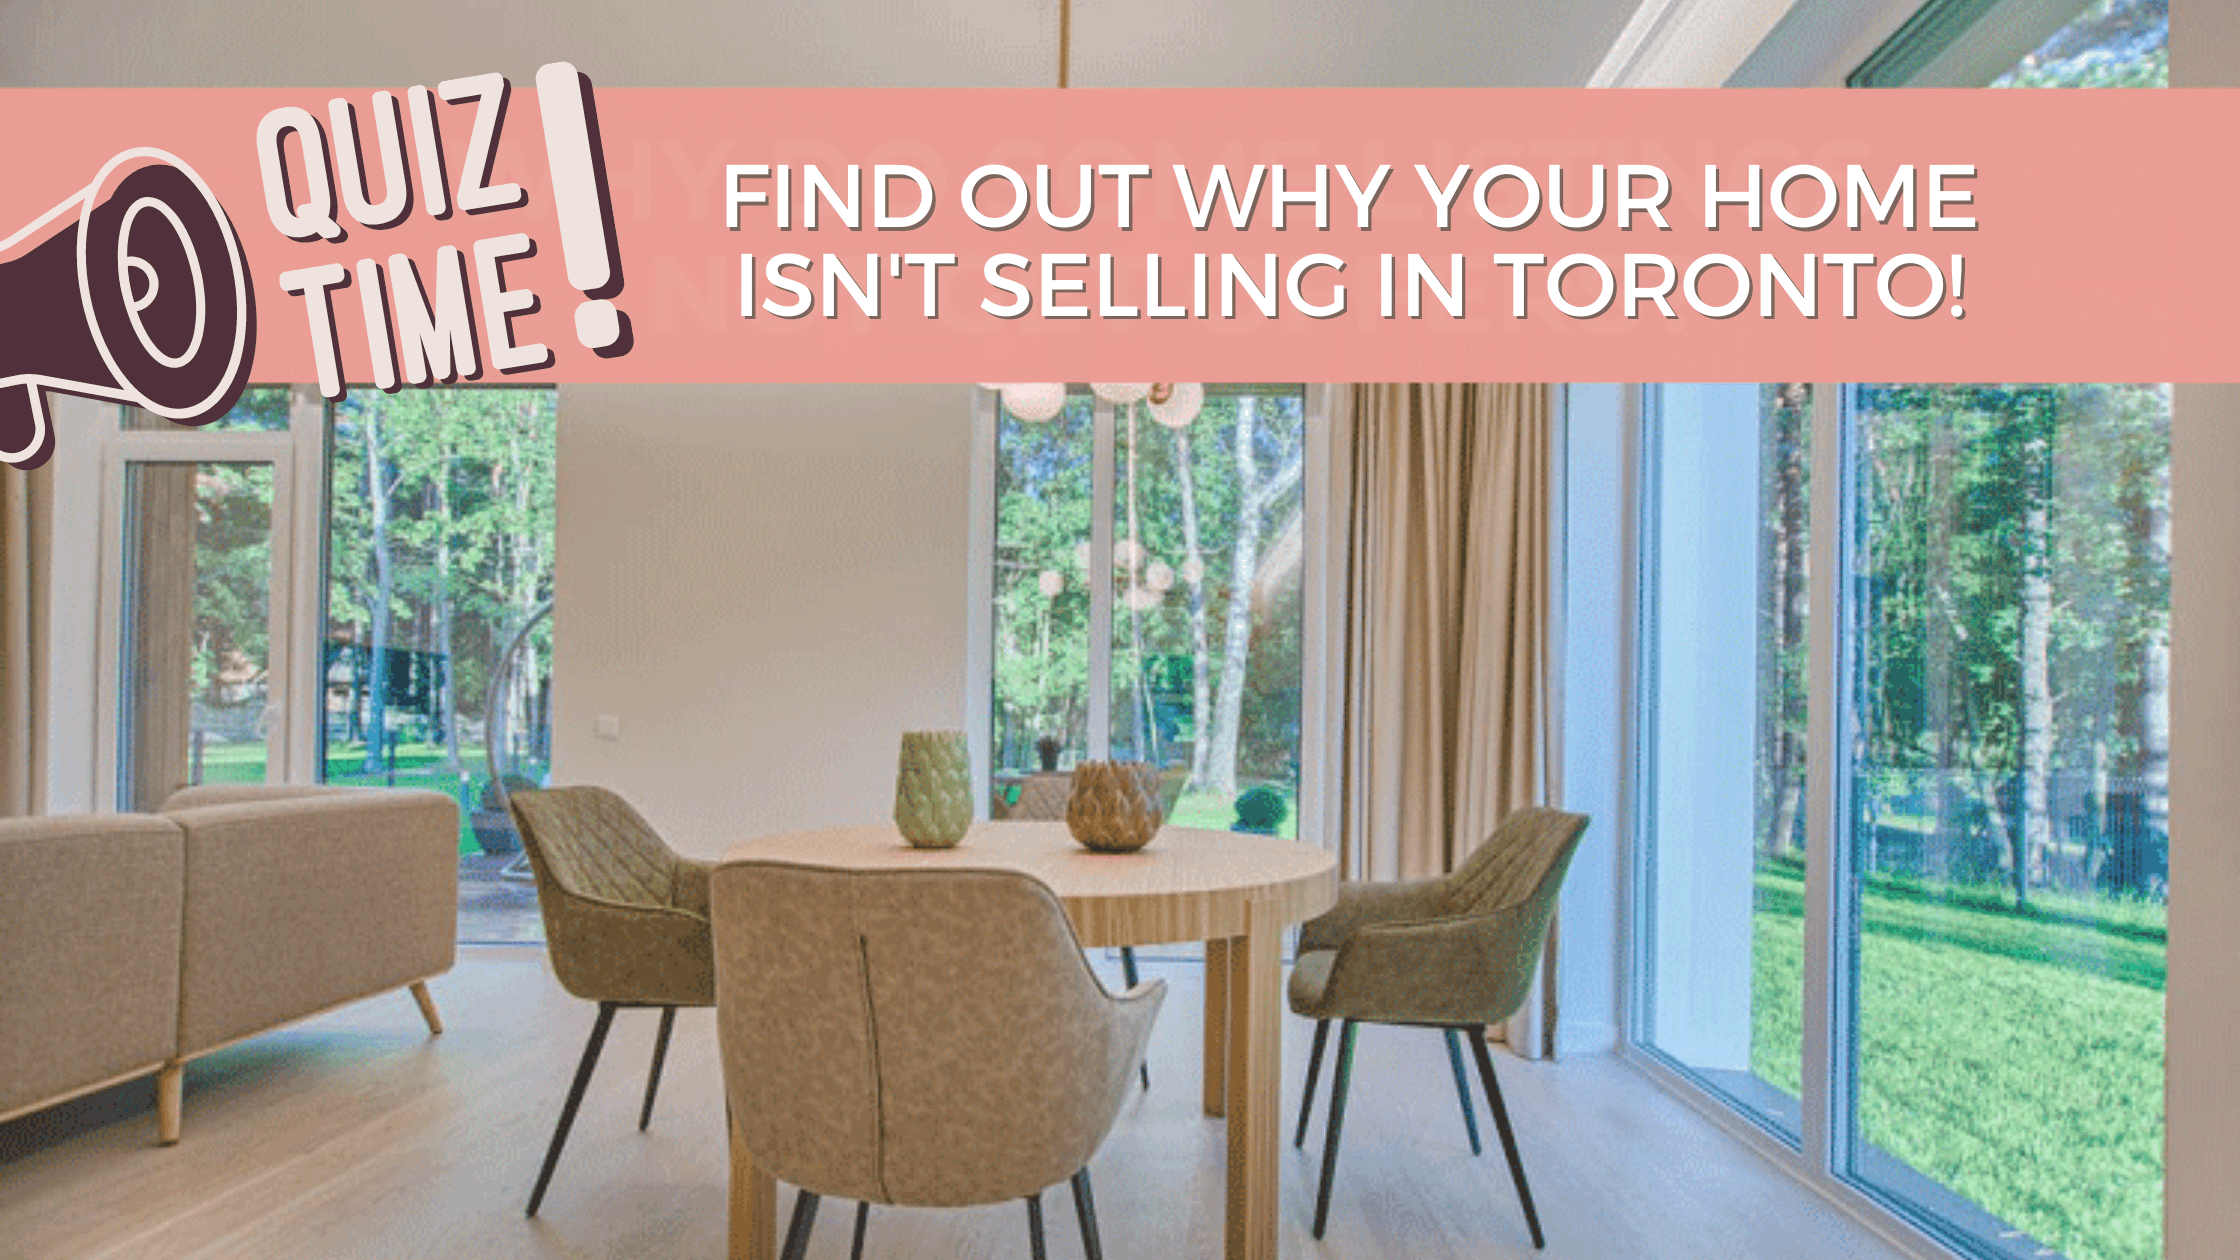 quiz on why your home isnt selling in toronto